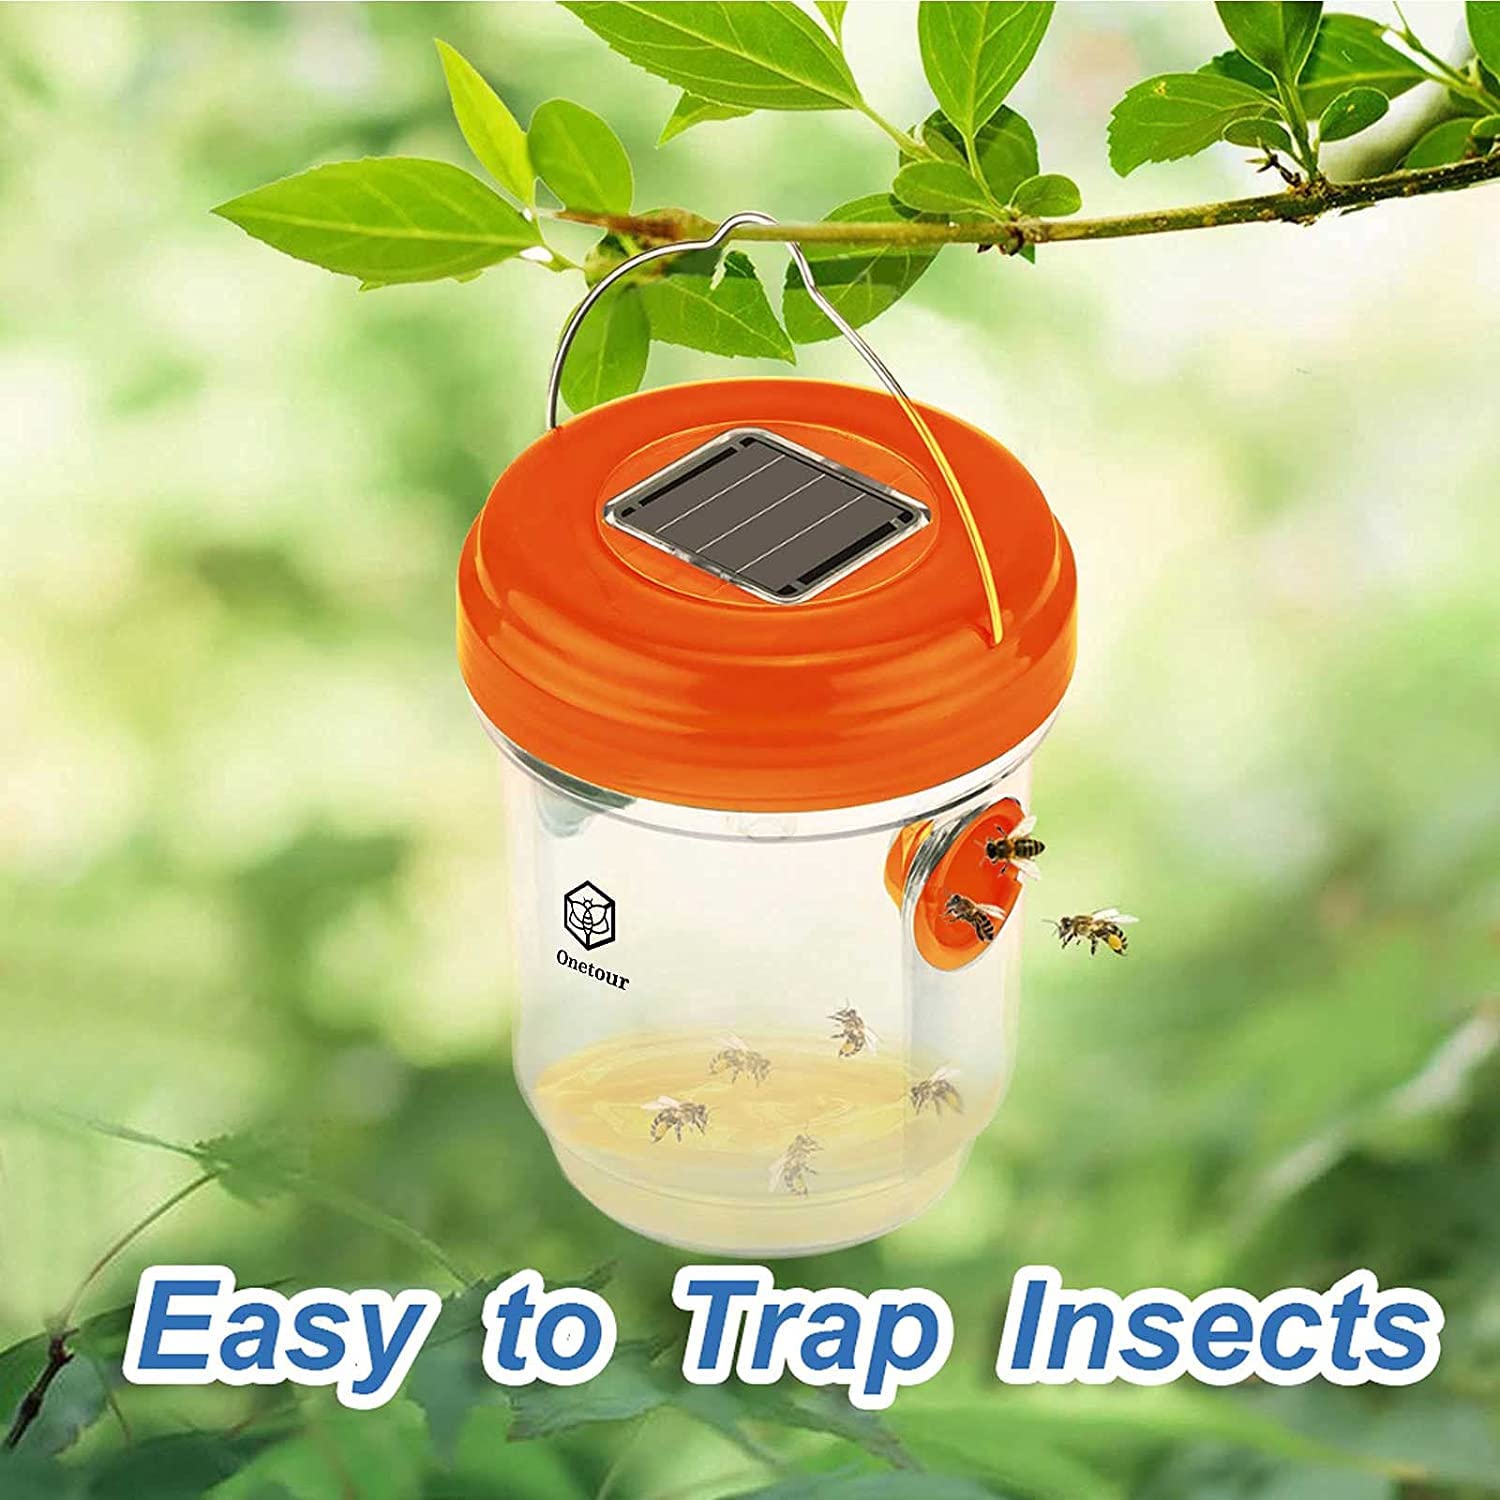 Petoor Wasp Traps for Hunting Wasps, Bees, Hornets, Insects, Yellow Jacket Traps, Wasp Trap Catcher, Reusable Solar Powered Hanging for Outdoor, 2 Packs